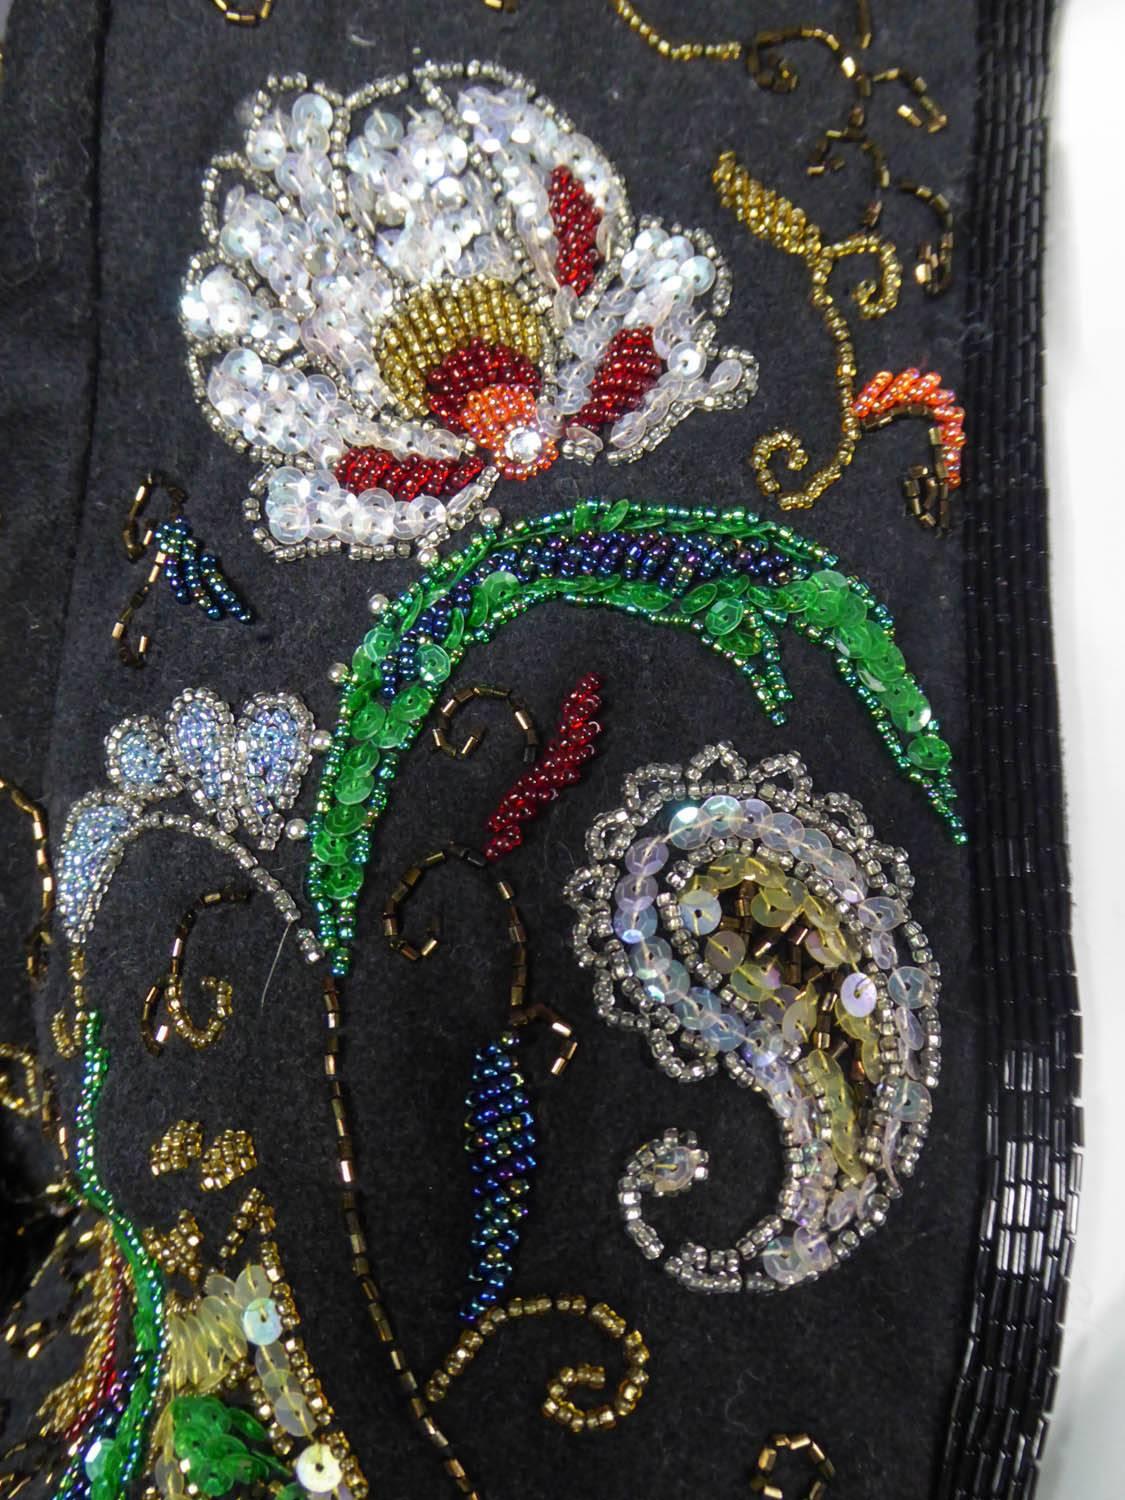 Circa 1988 - 1990

France

Yves Saint-Laurent Rive Gauche bolero with long sleeves and shoudelr pads. Black wool felt, embroidered with glitter, sequins and tubular sequins polychrome and iridescent in the dominant colors of green, pearly, purple,